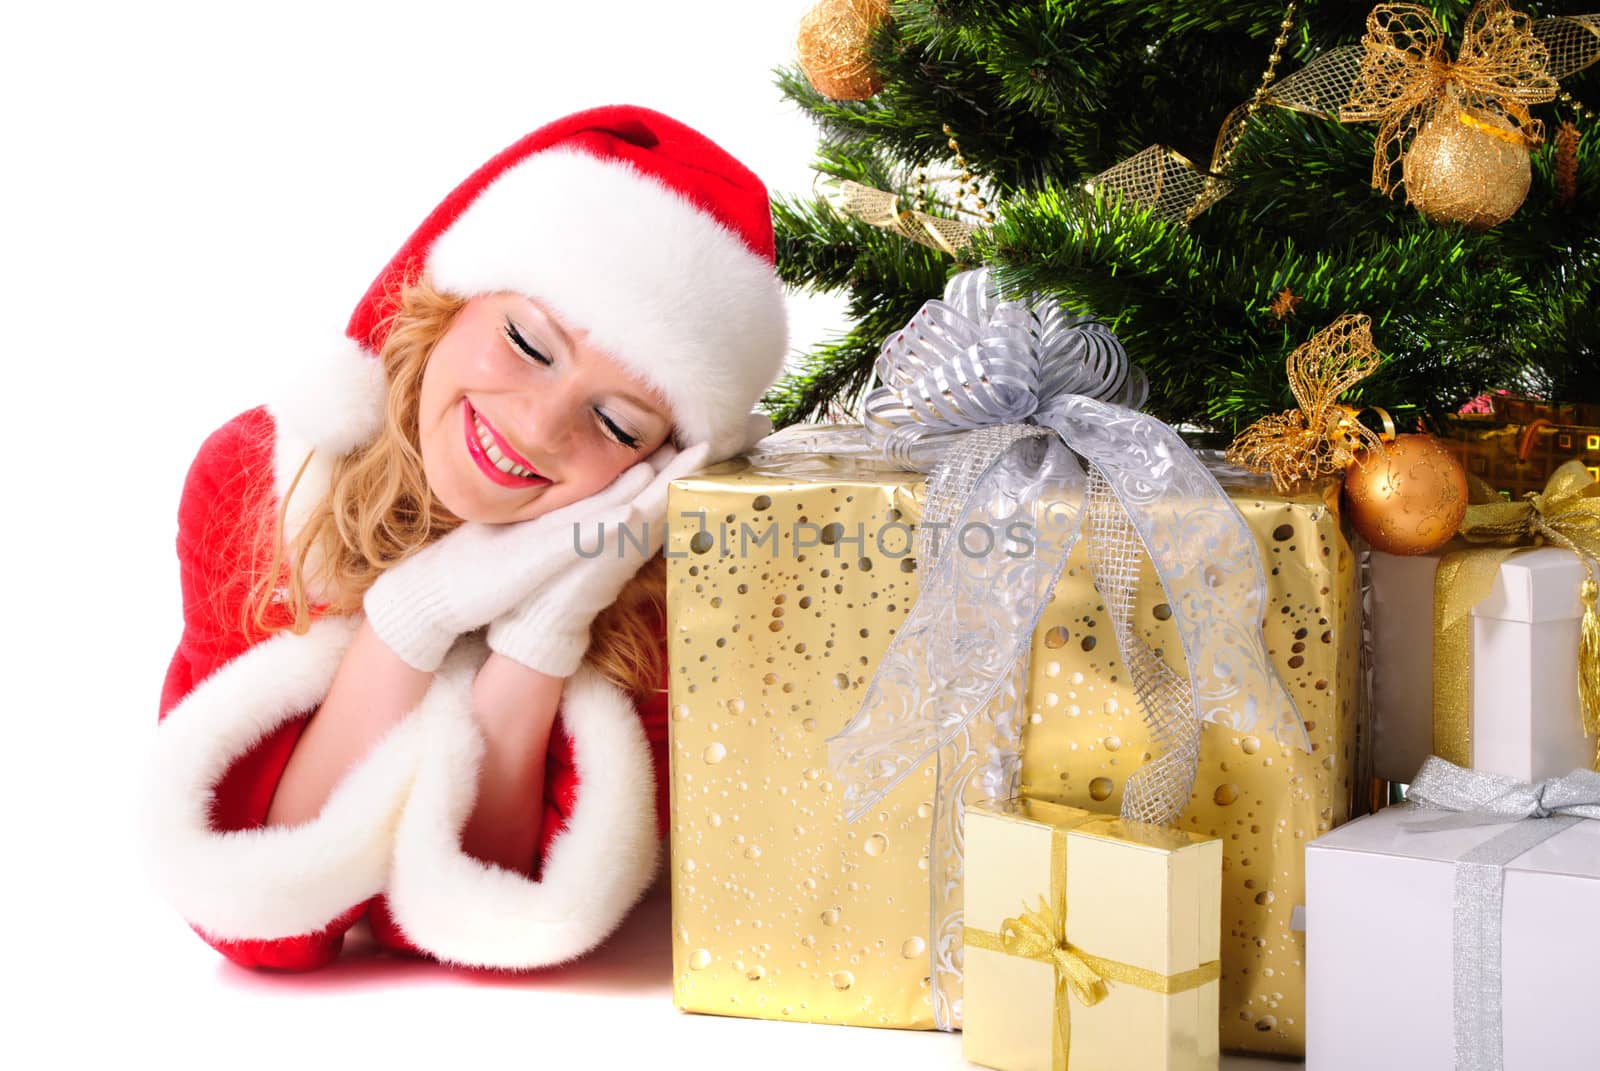 Daydreamed christmas santa girl with gifts and decorated fir-tree.